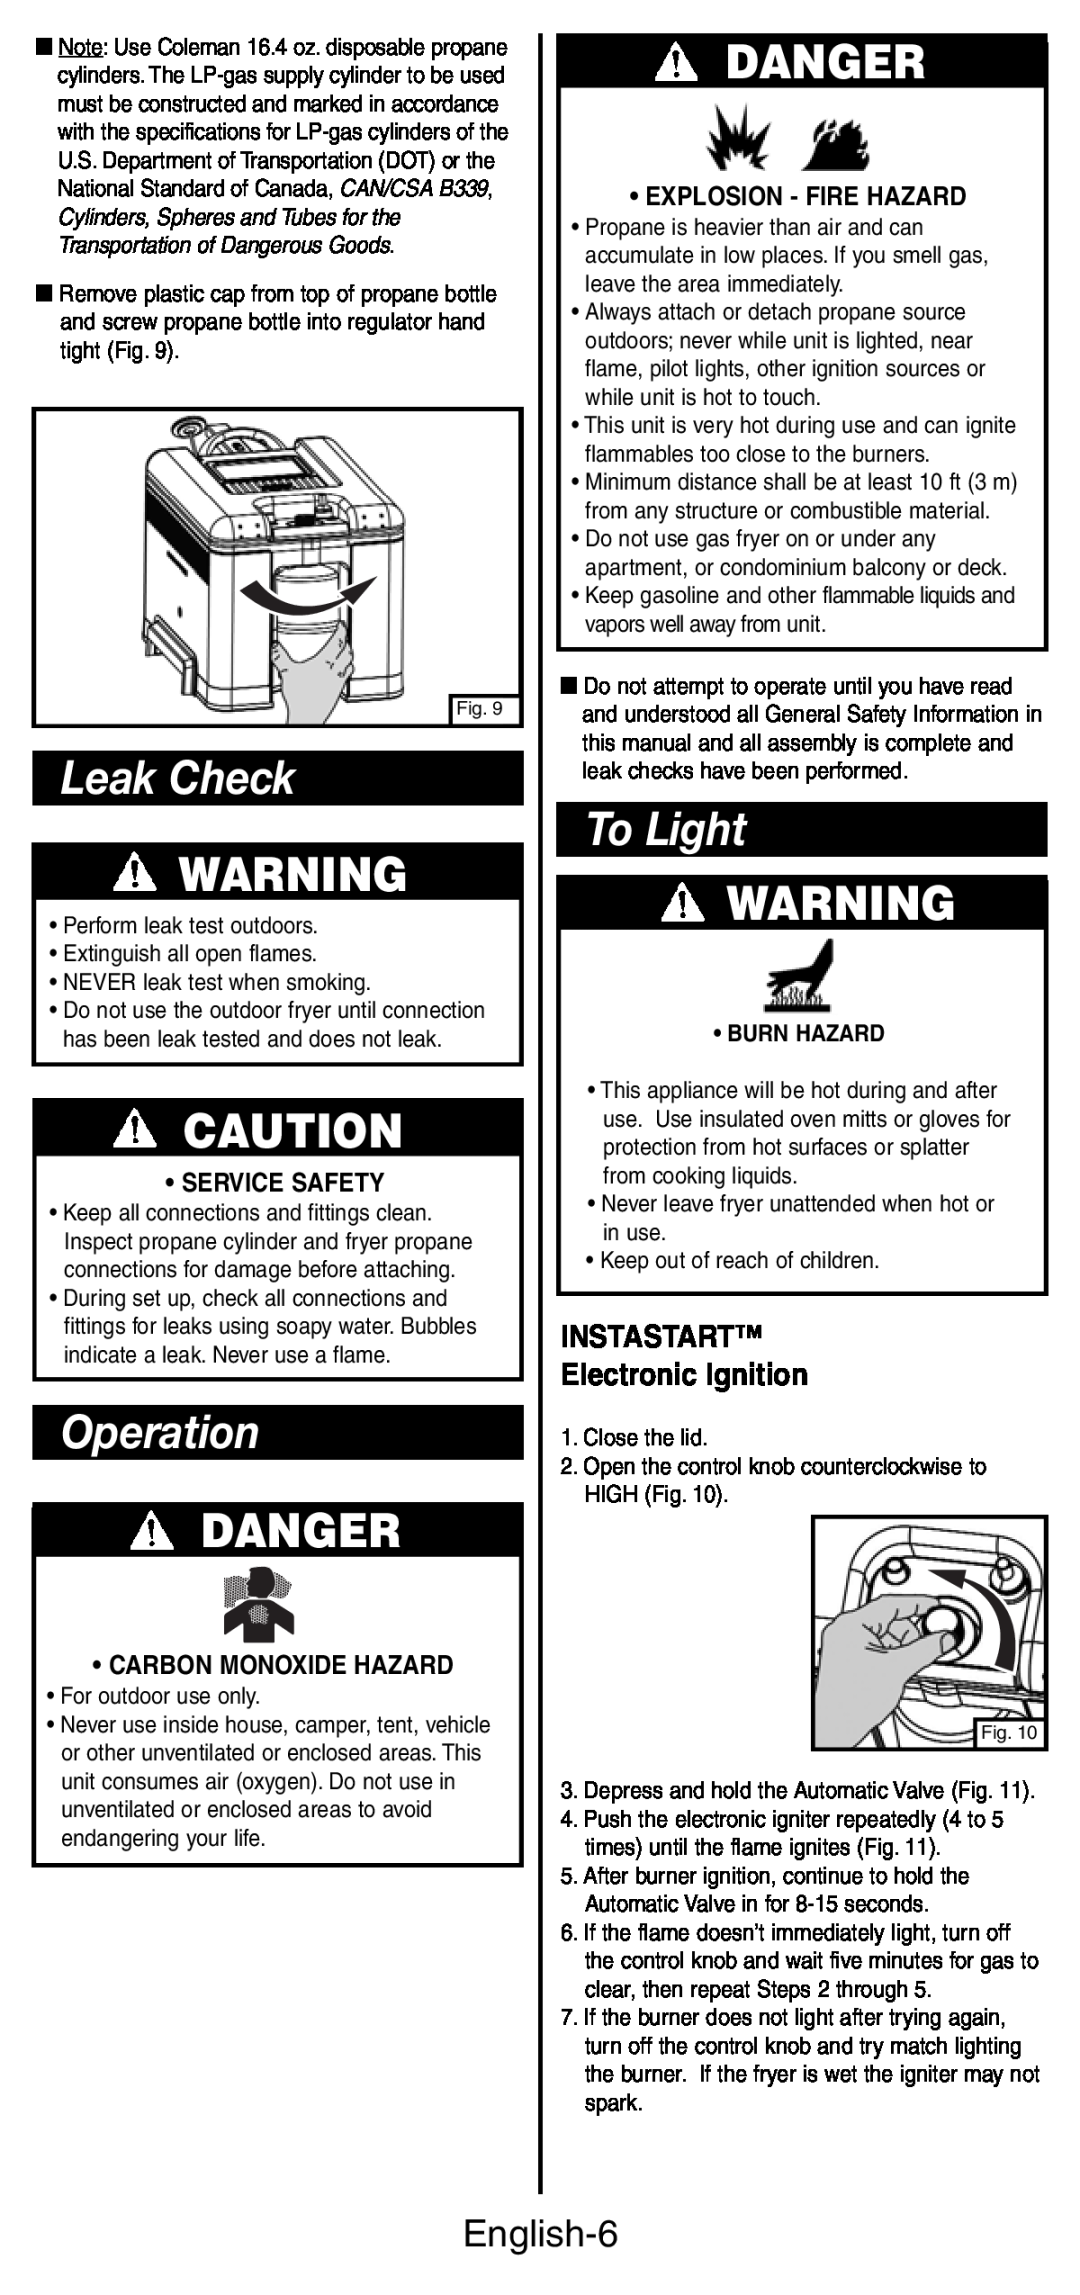 Coleman 9937 Leak Check, Operation, To Light, Danger, English-6, INSTASTART Electronic Ignition, Service Safety 